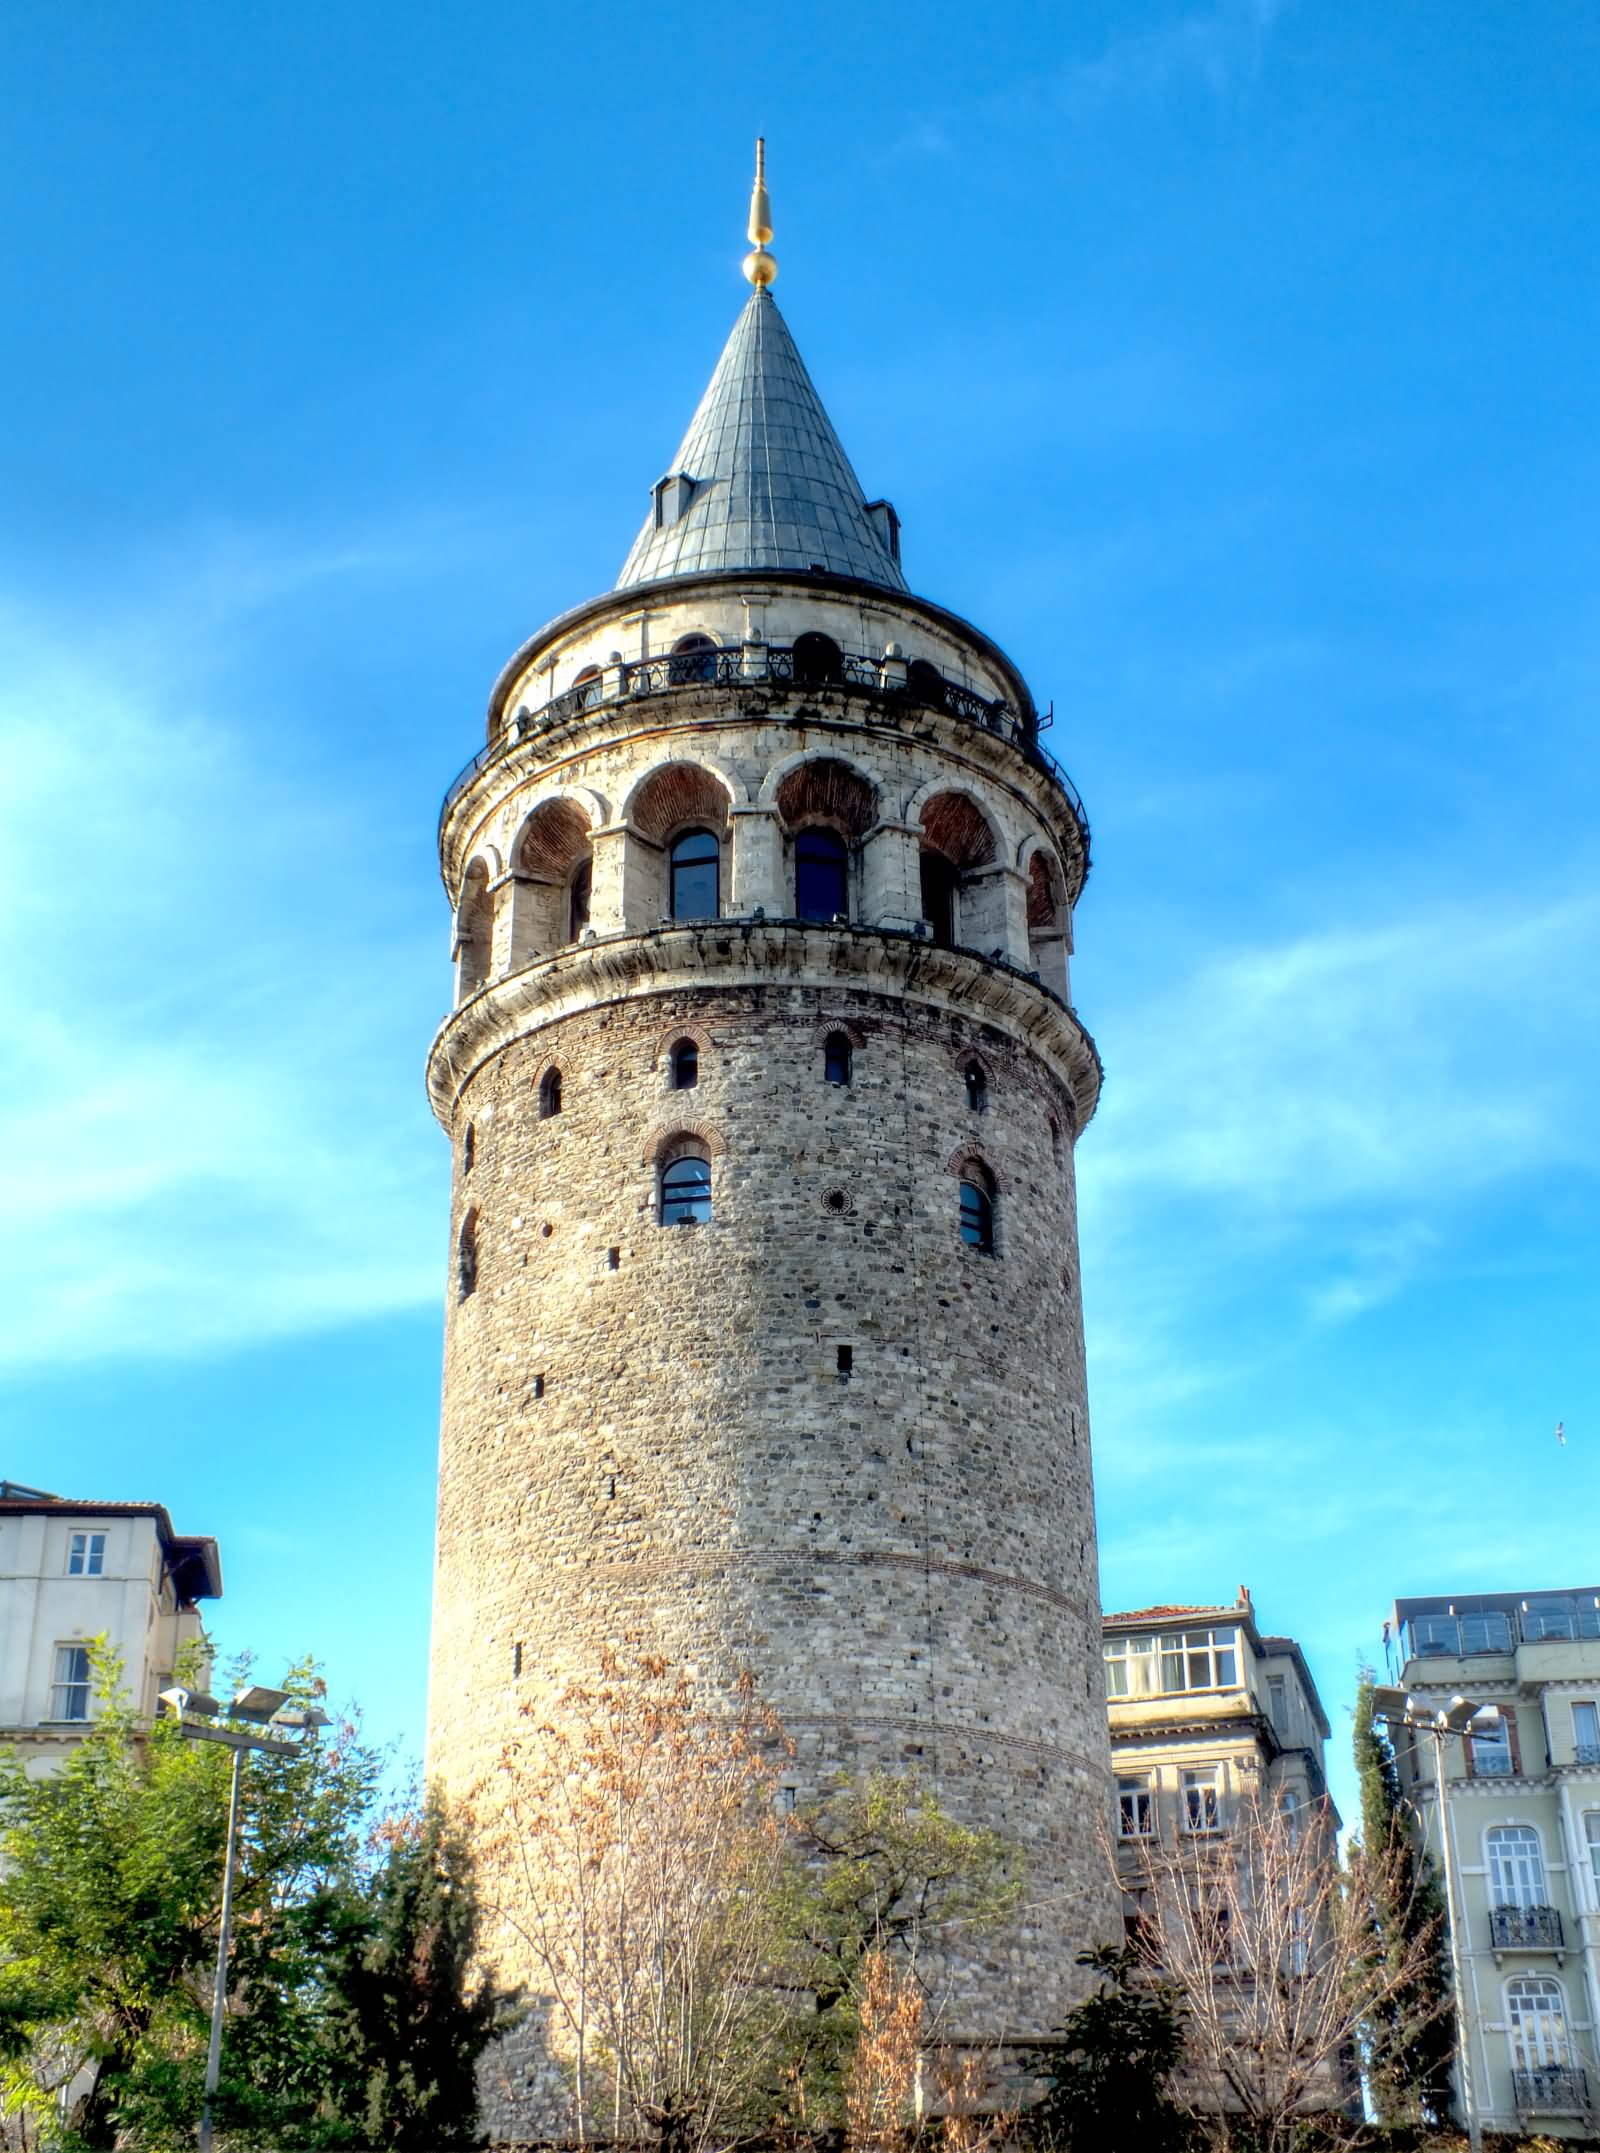 The Galata Tower View From The Main Square In Istanbul